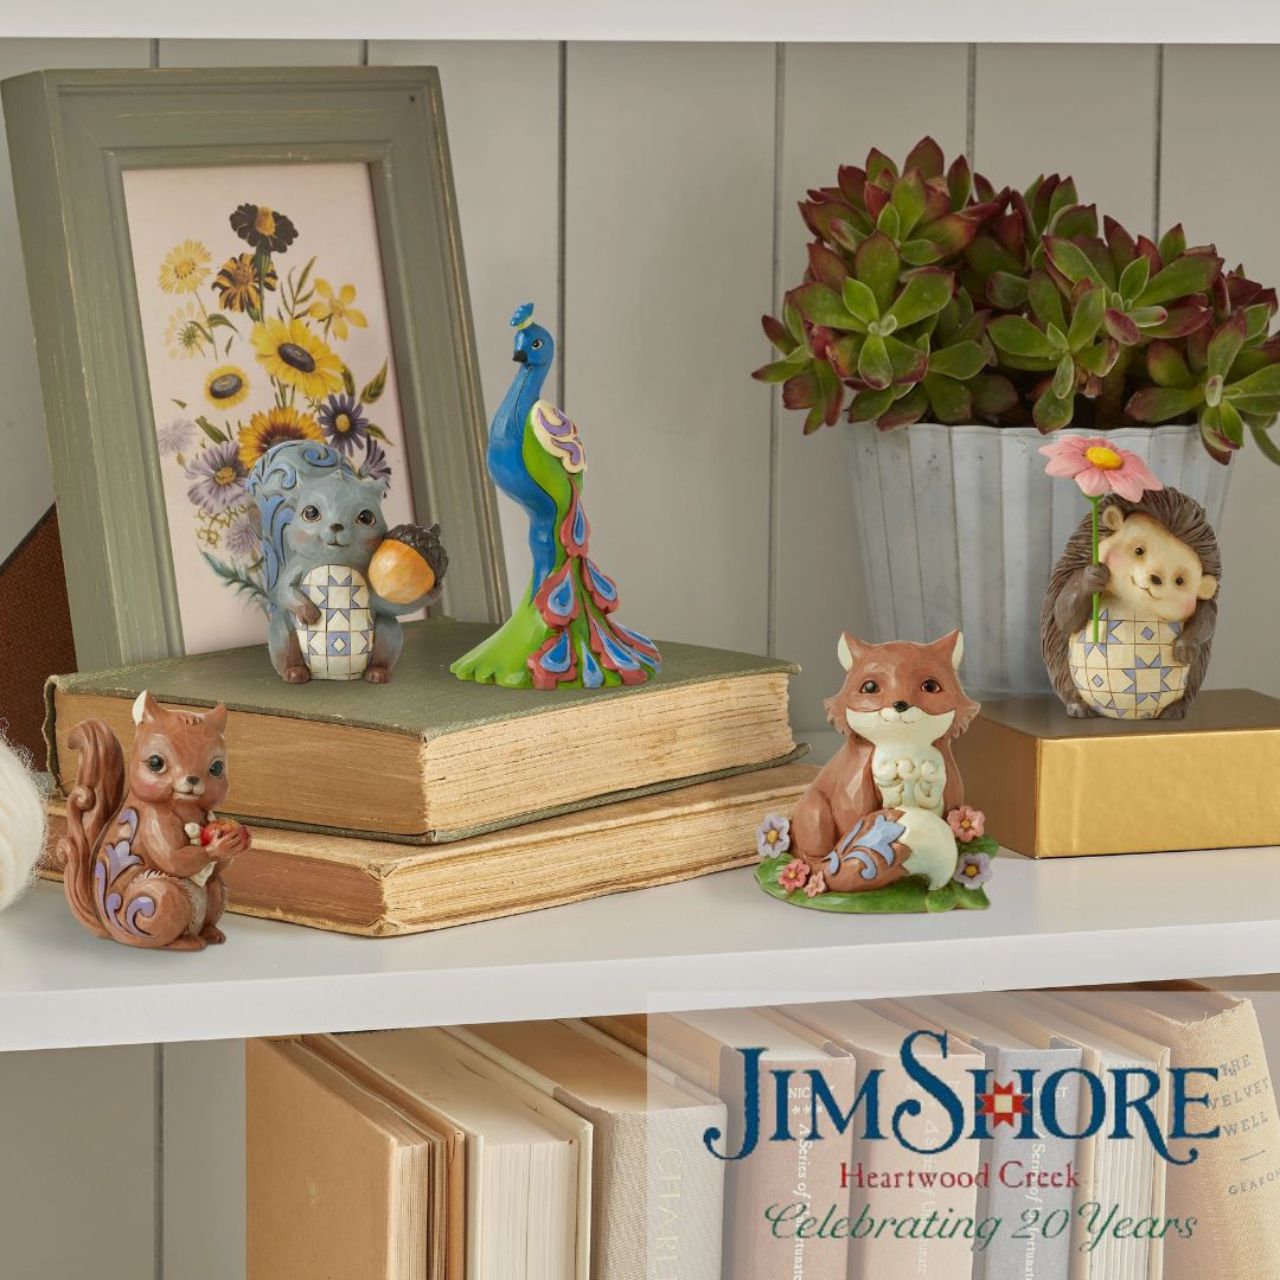 Peacock Mini Figurine by Jim Shore  Handcrafted in breath-taking detail, this delightful Peacock Mini Figurine is beautifully decorated in Jim Shore's subtle combination of traditional quilt. These charming friends of the animal kingdom bring a small dose of delight into your home with sweet dispositions and delicate craftsmanship.